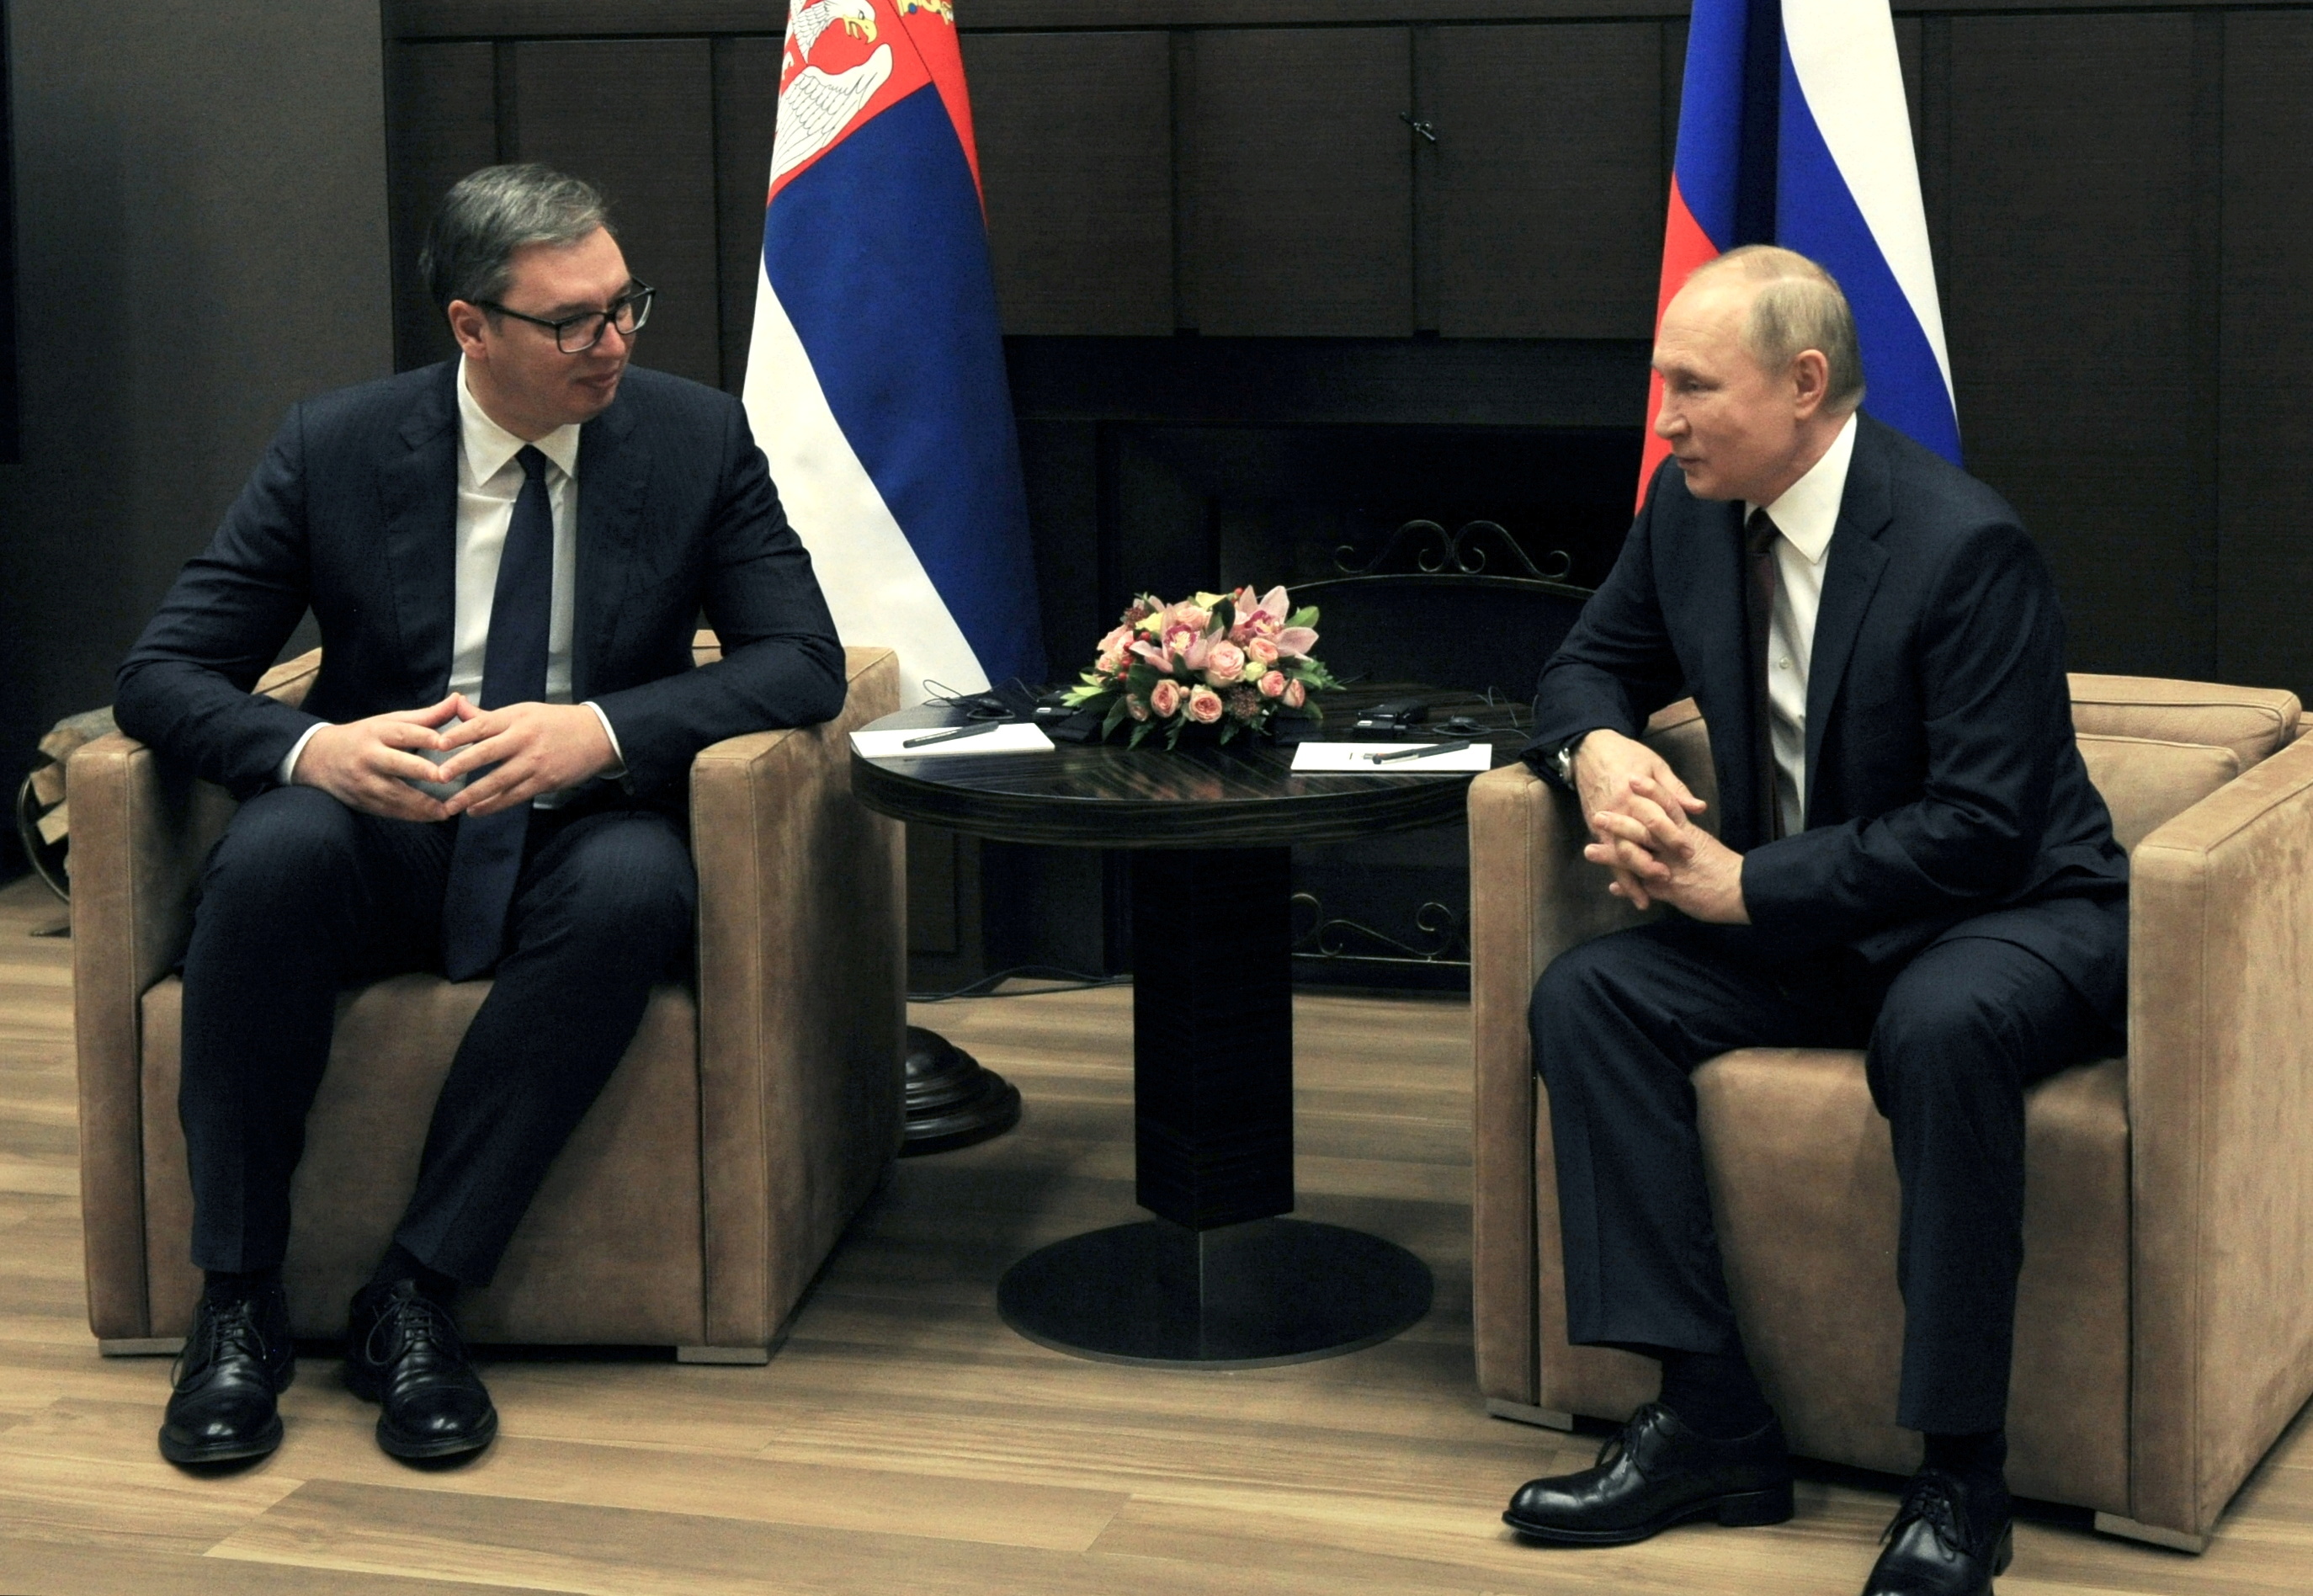 Russian President Putin meets with his Serbian counterpart Vucic in Sochi